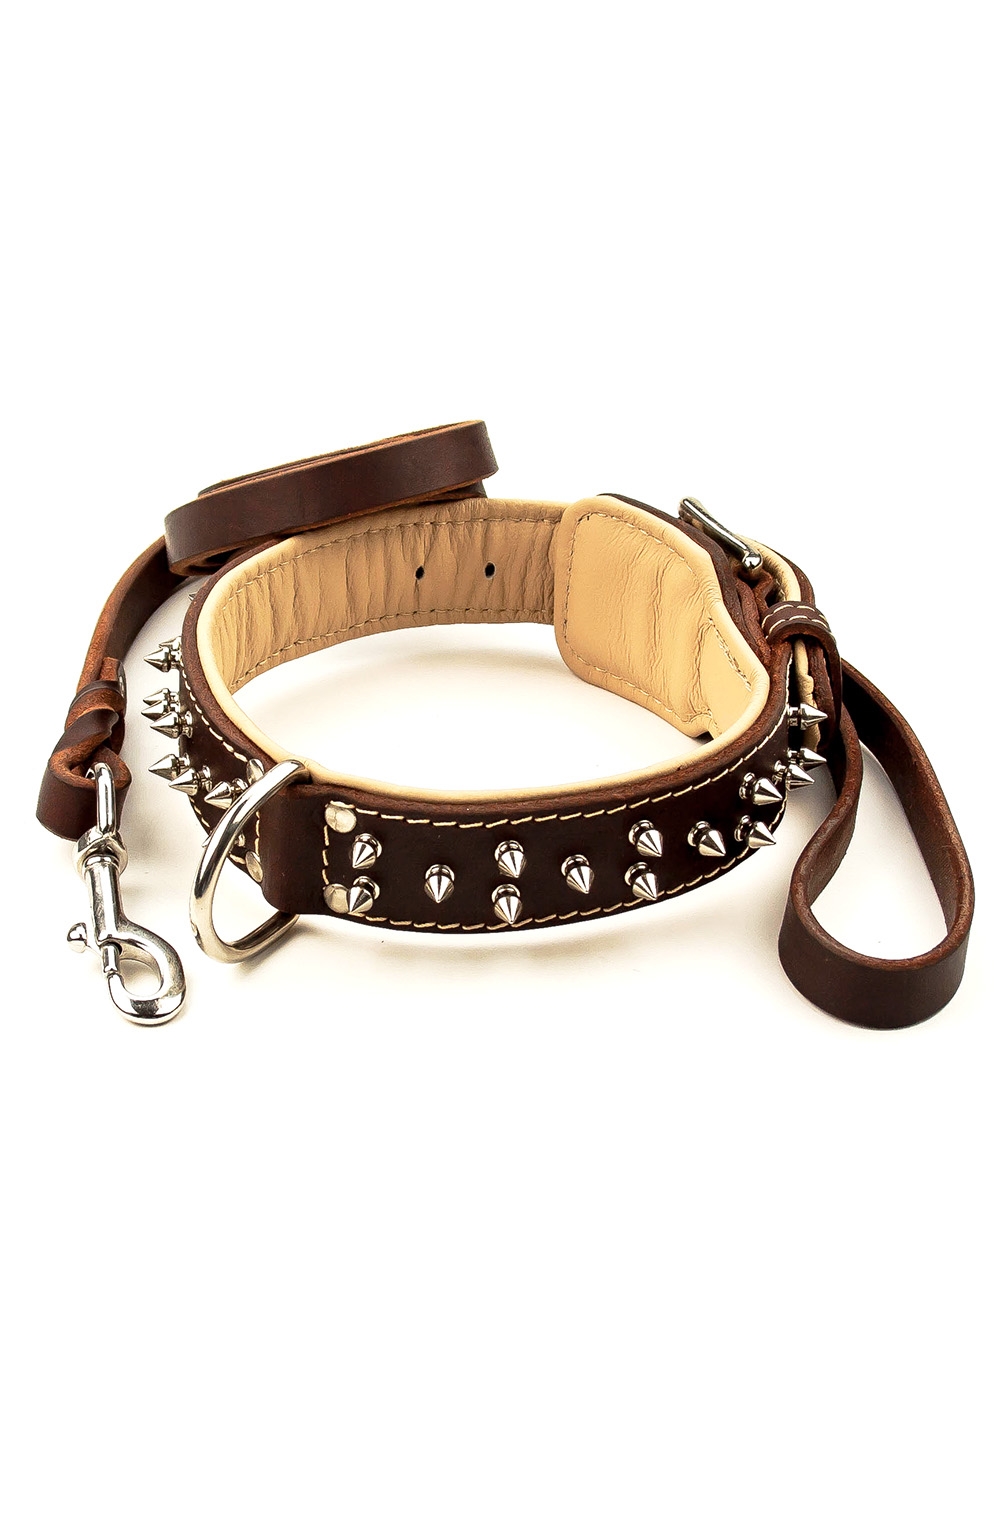 Spiked Leather Dog Collar and Braided Leash Set - Old Mill Store